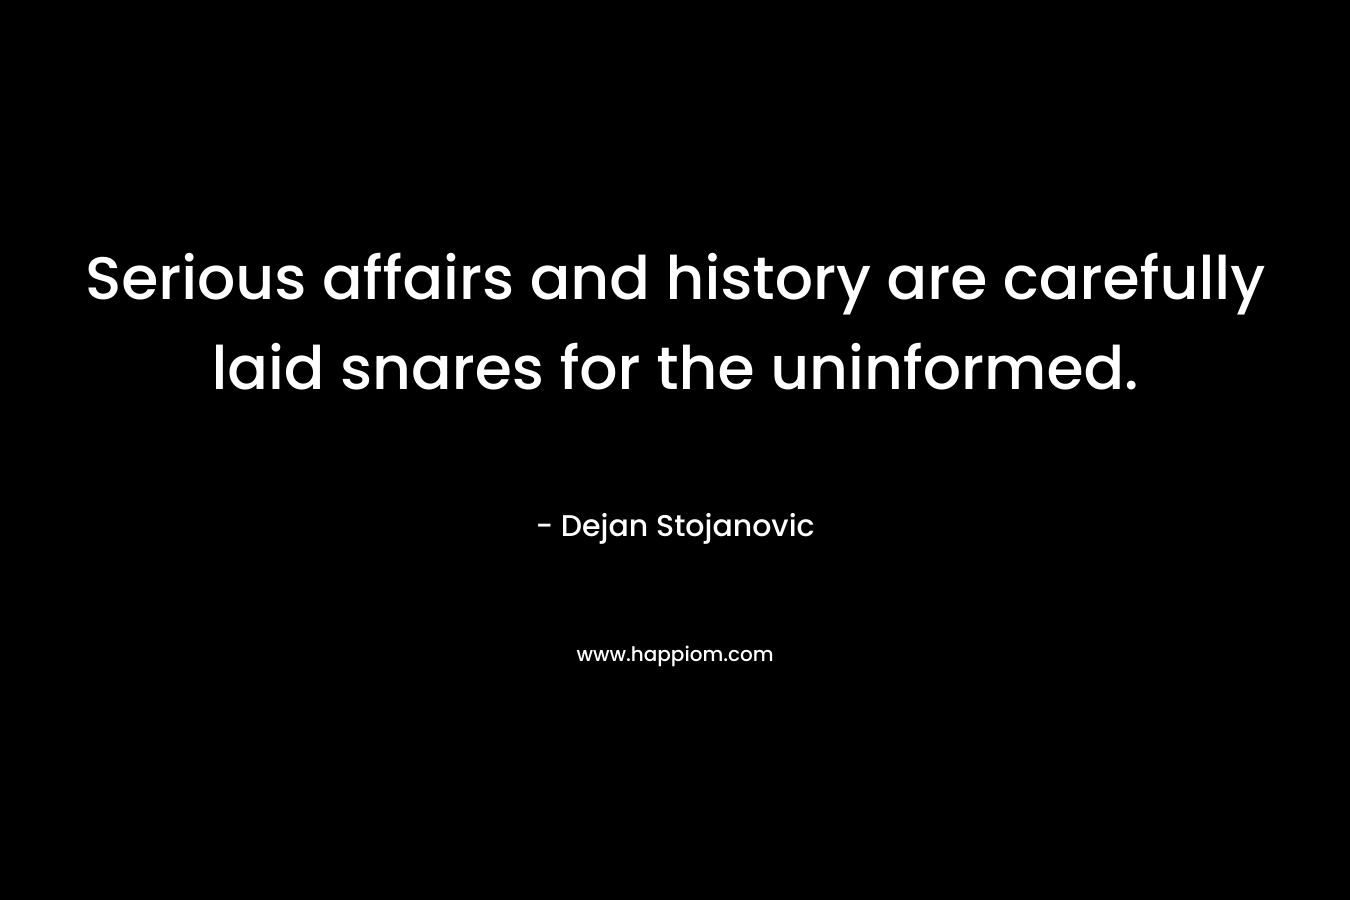 Serious affairs and history are carefully laid snares for the uninformed.